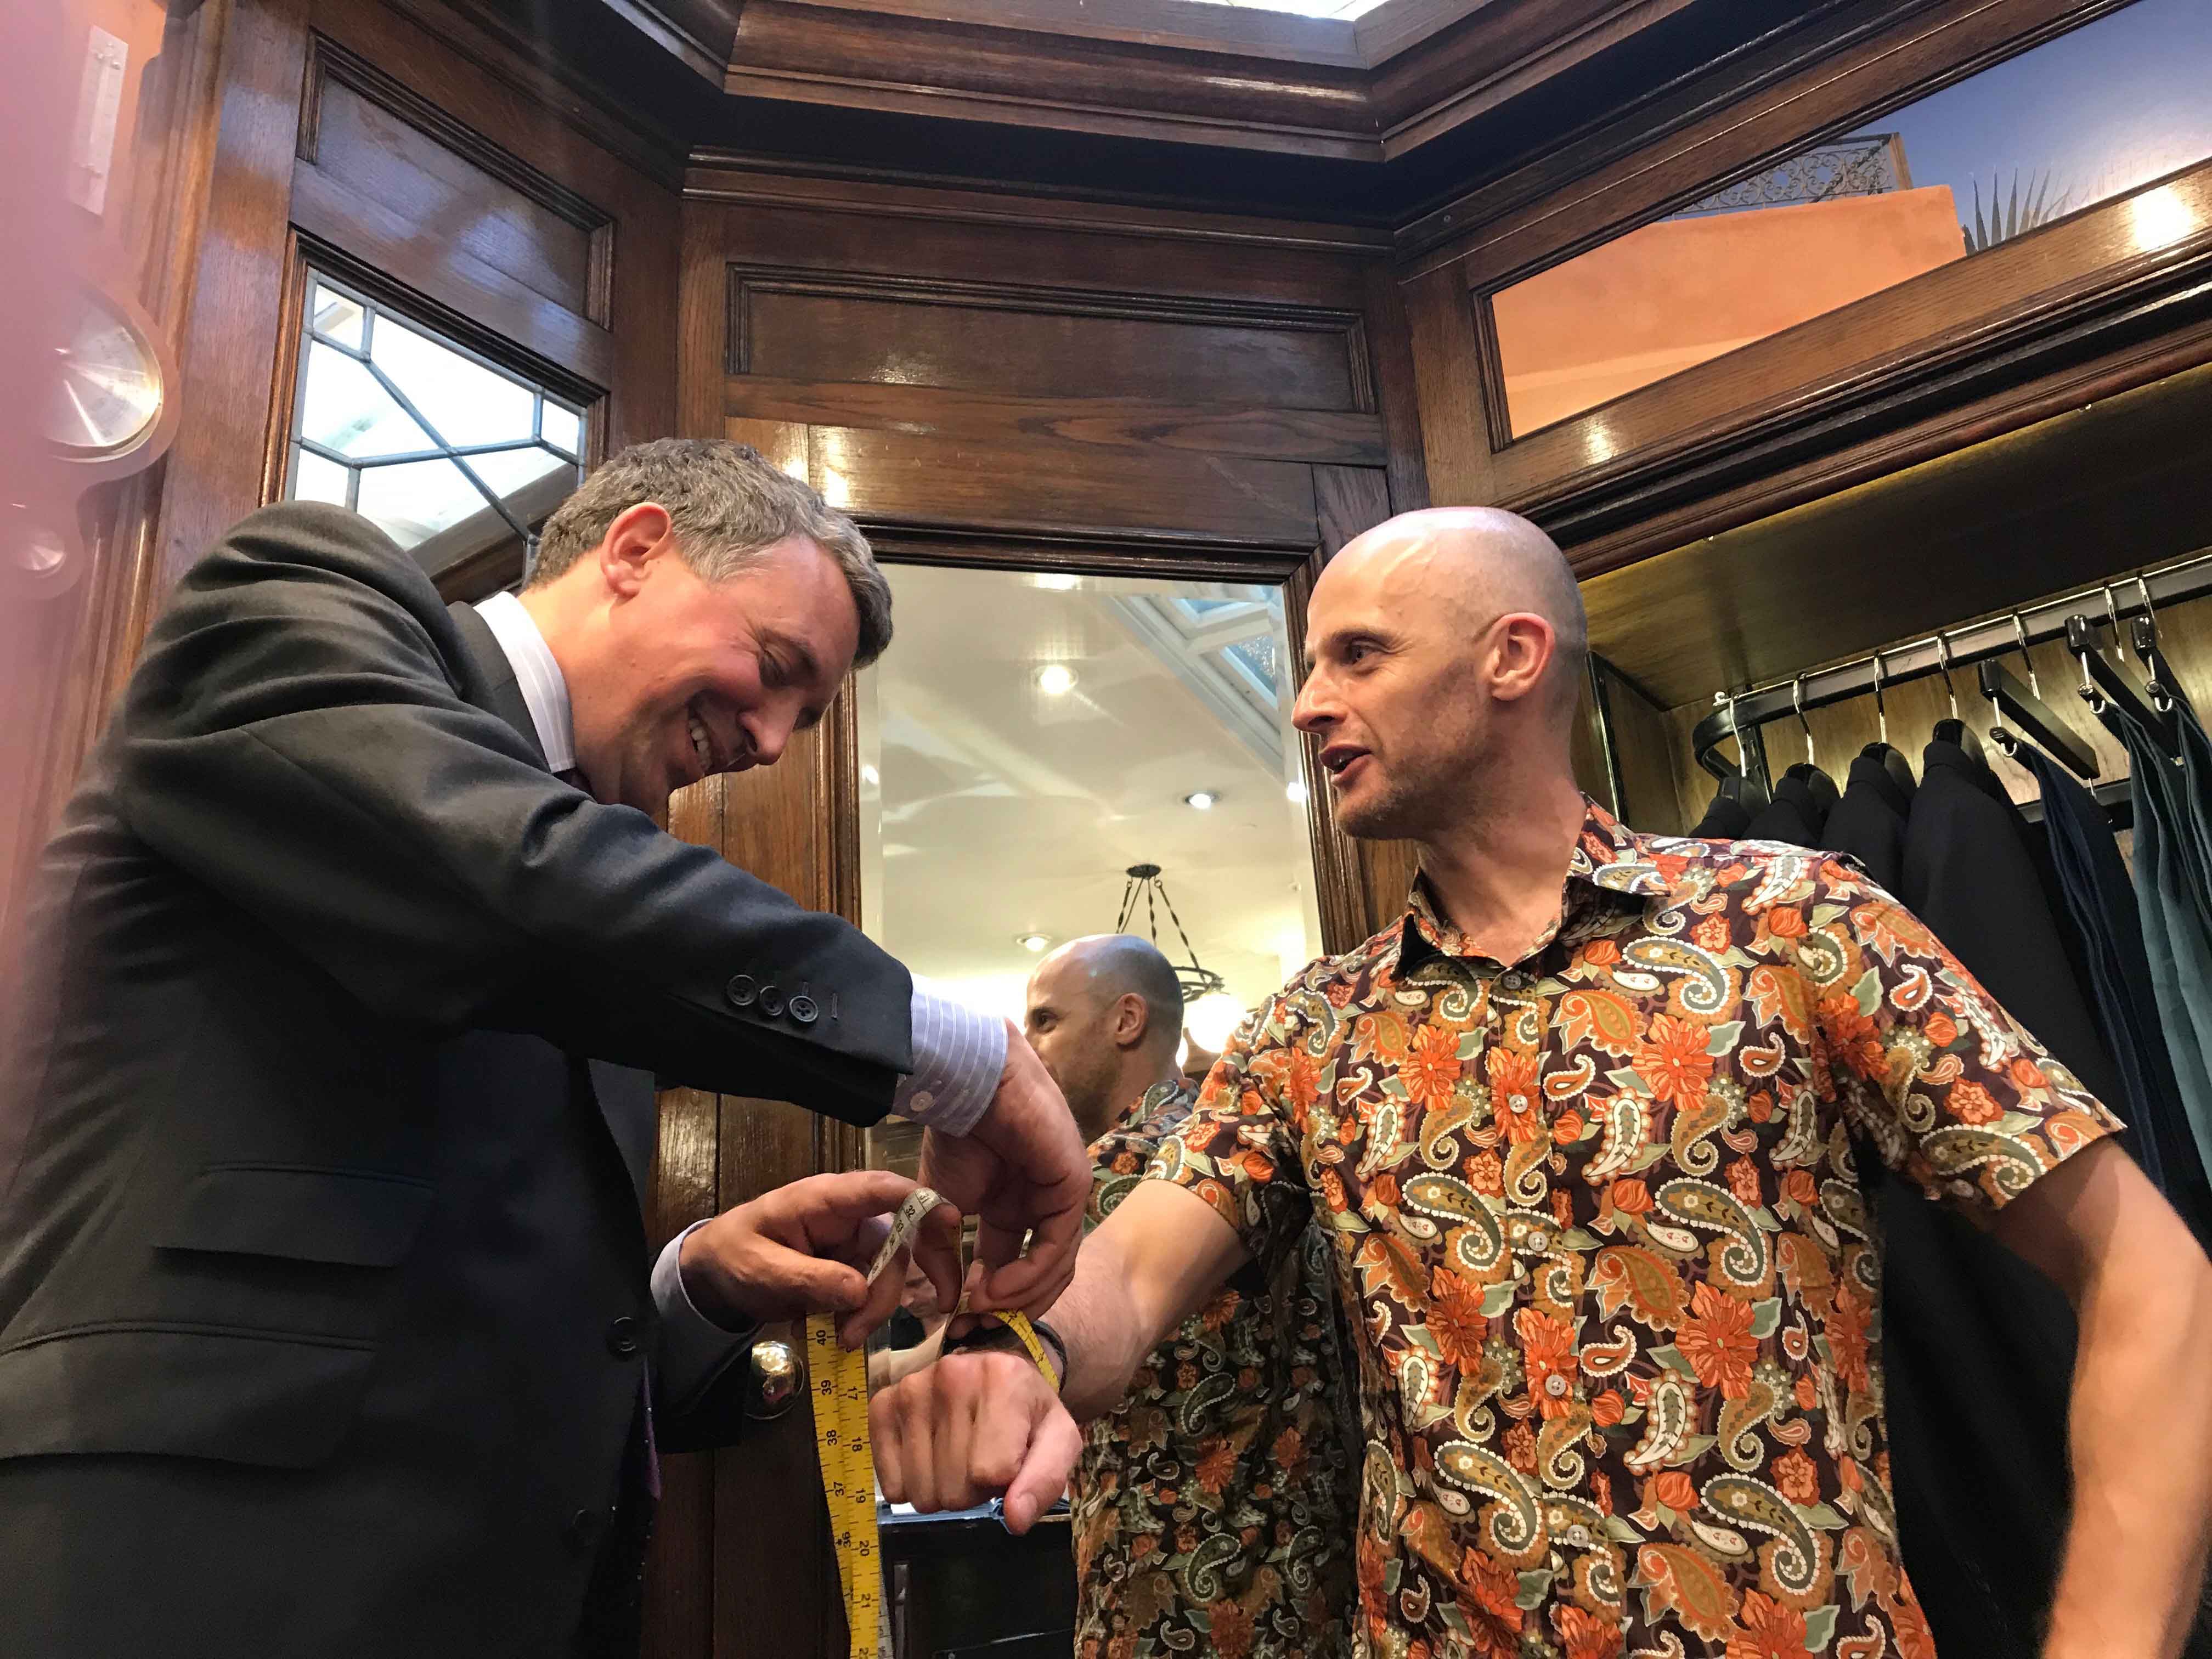 being measured in turnbull and asser where sean connery got measured 